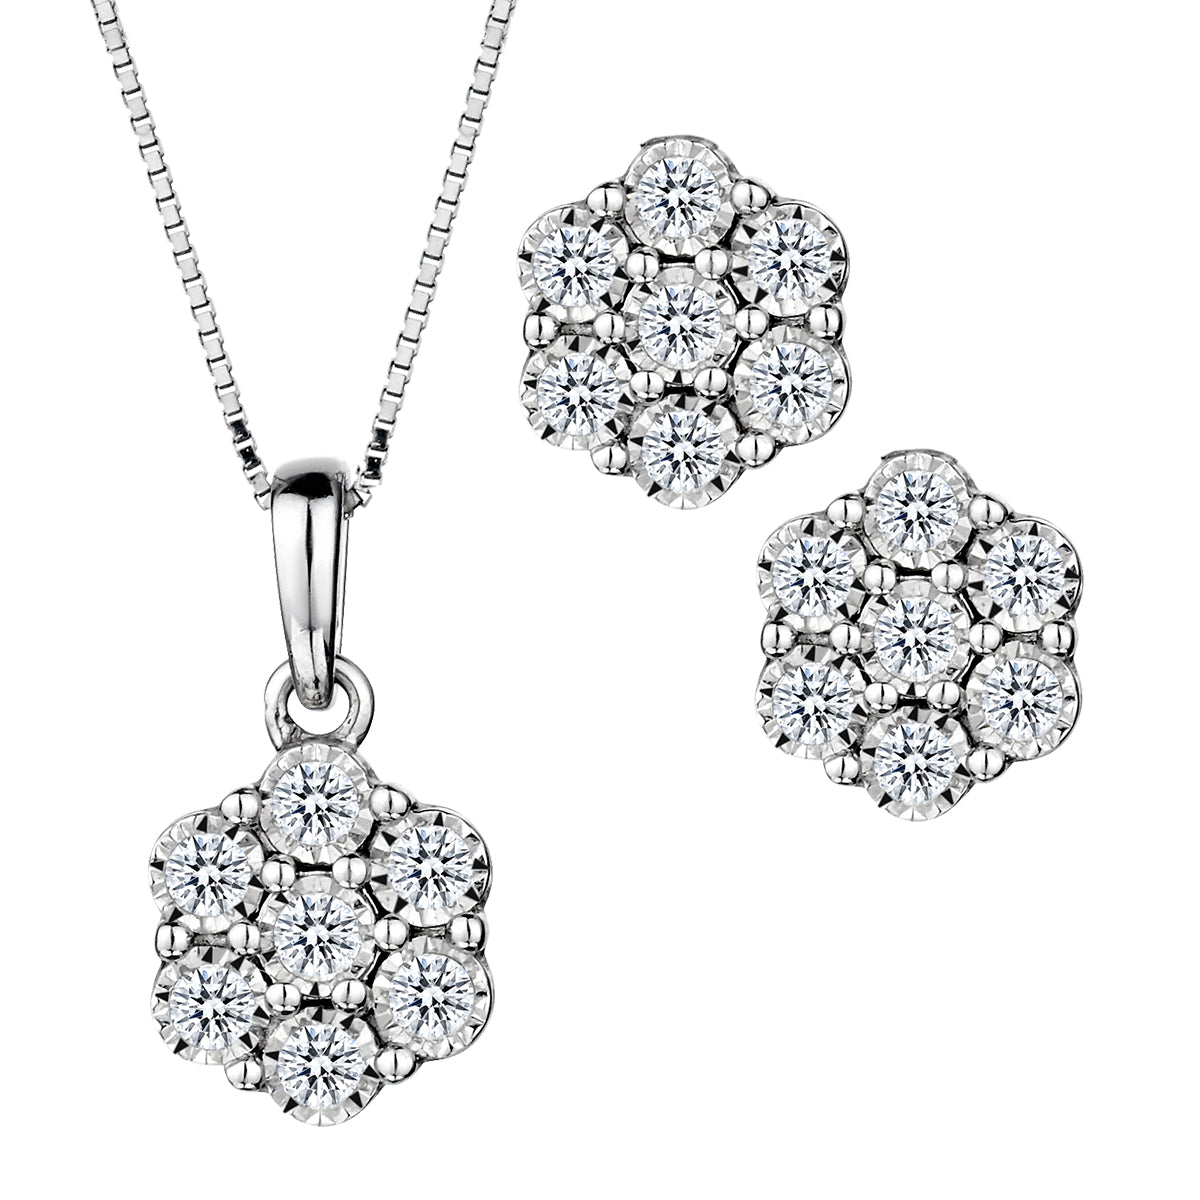 .50 Carat Diamond "Flower" Miracle Earrings and Pendant,  14kt White Gold Set. Necklaces and Pendants. Griffin Jewellery Designs. 